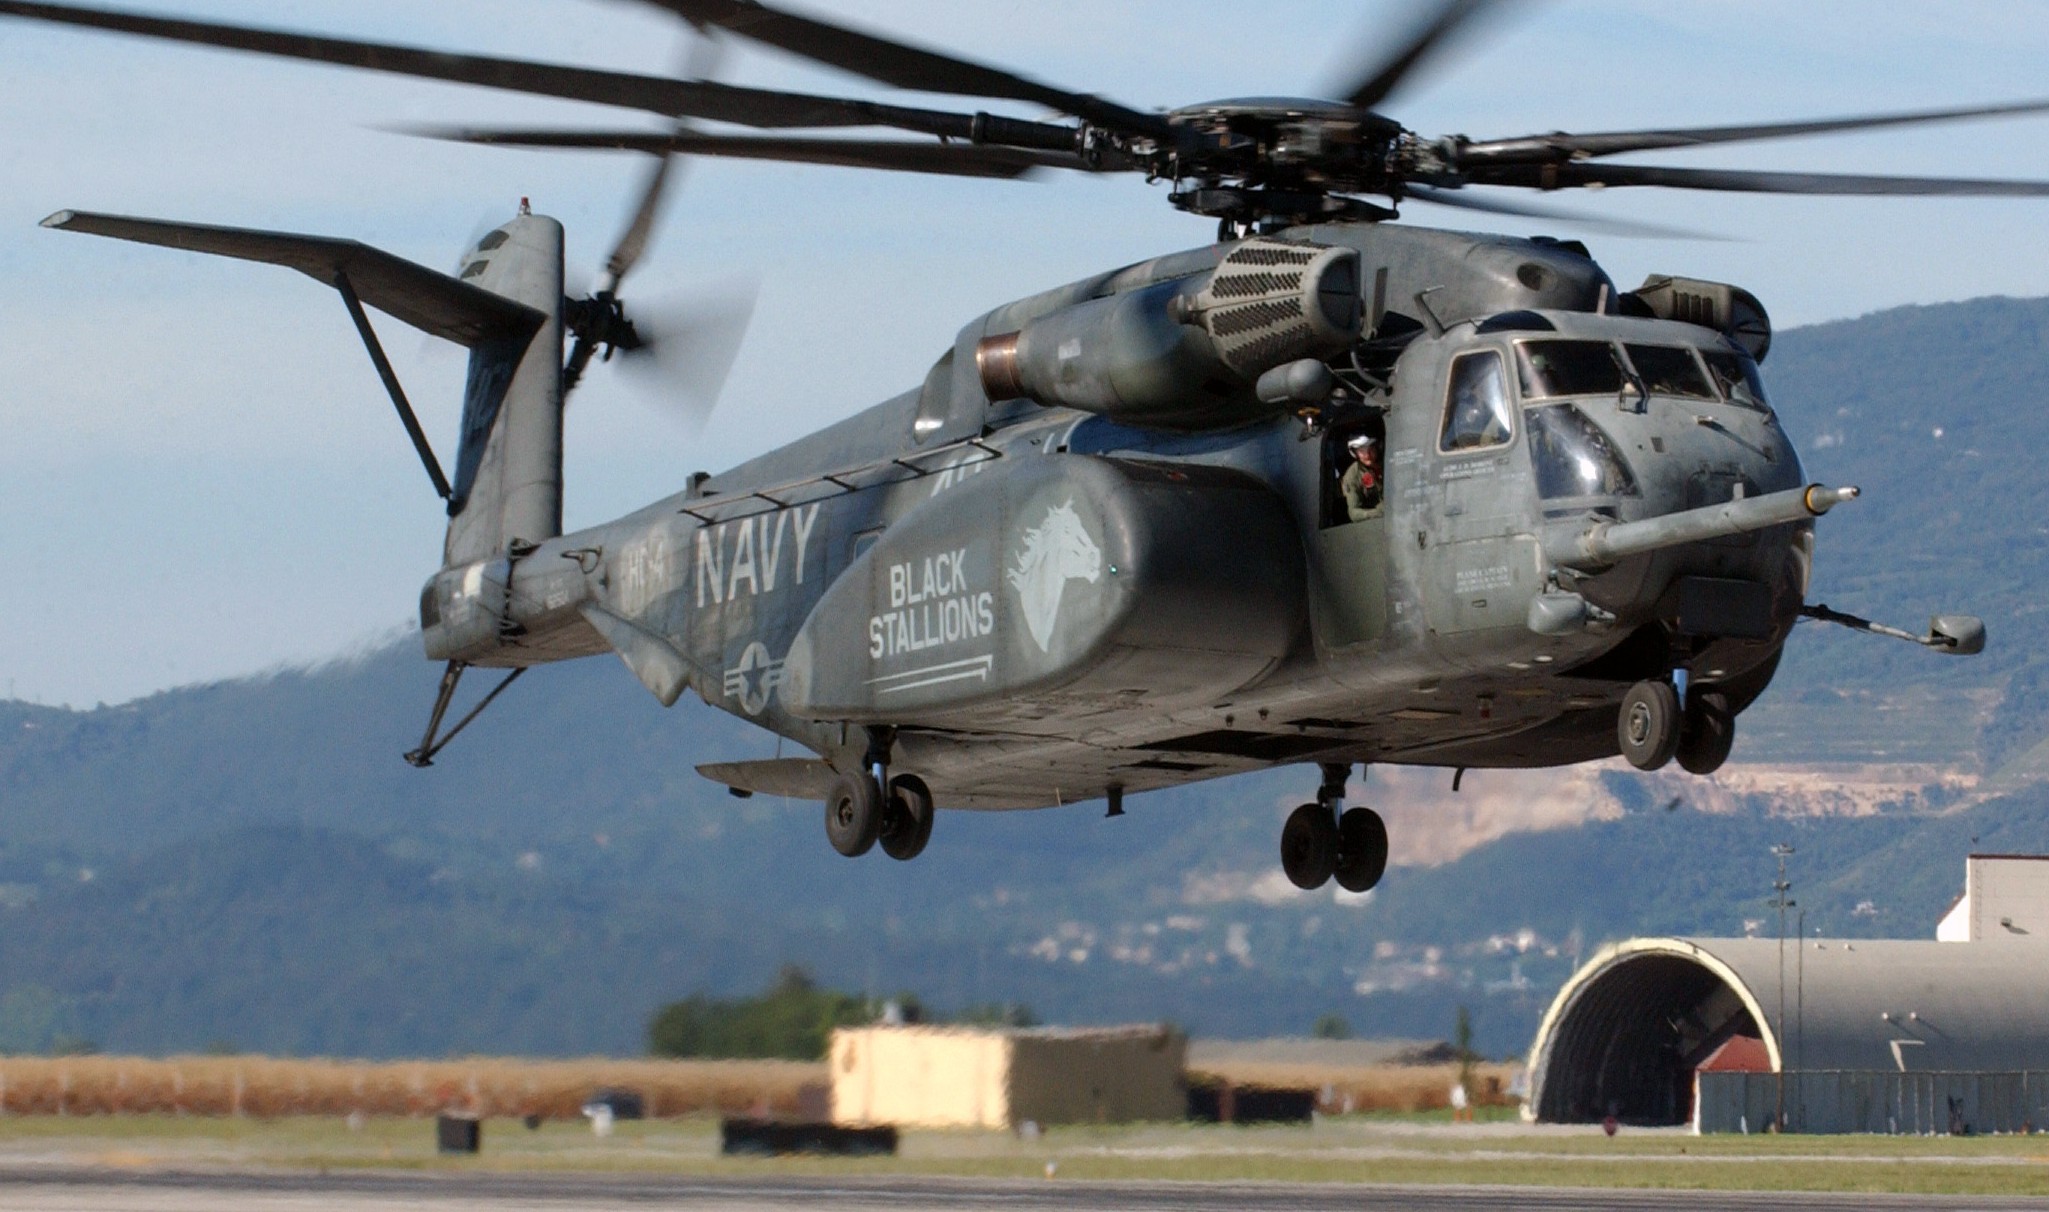 hc-4 black stallions helicopter combat support squadron mh-53e sea dragon 73 aviano air base italy